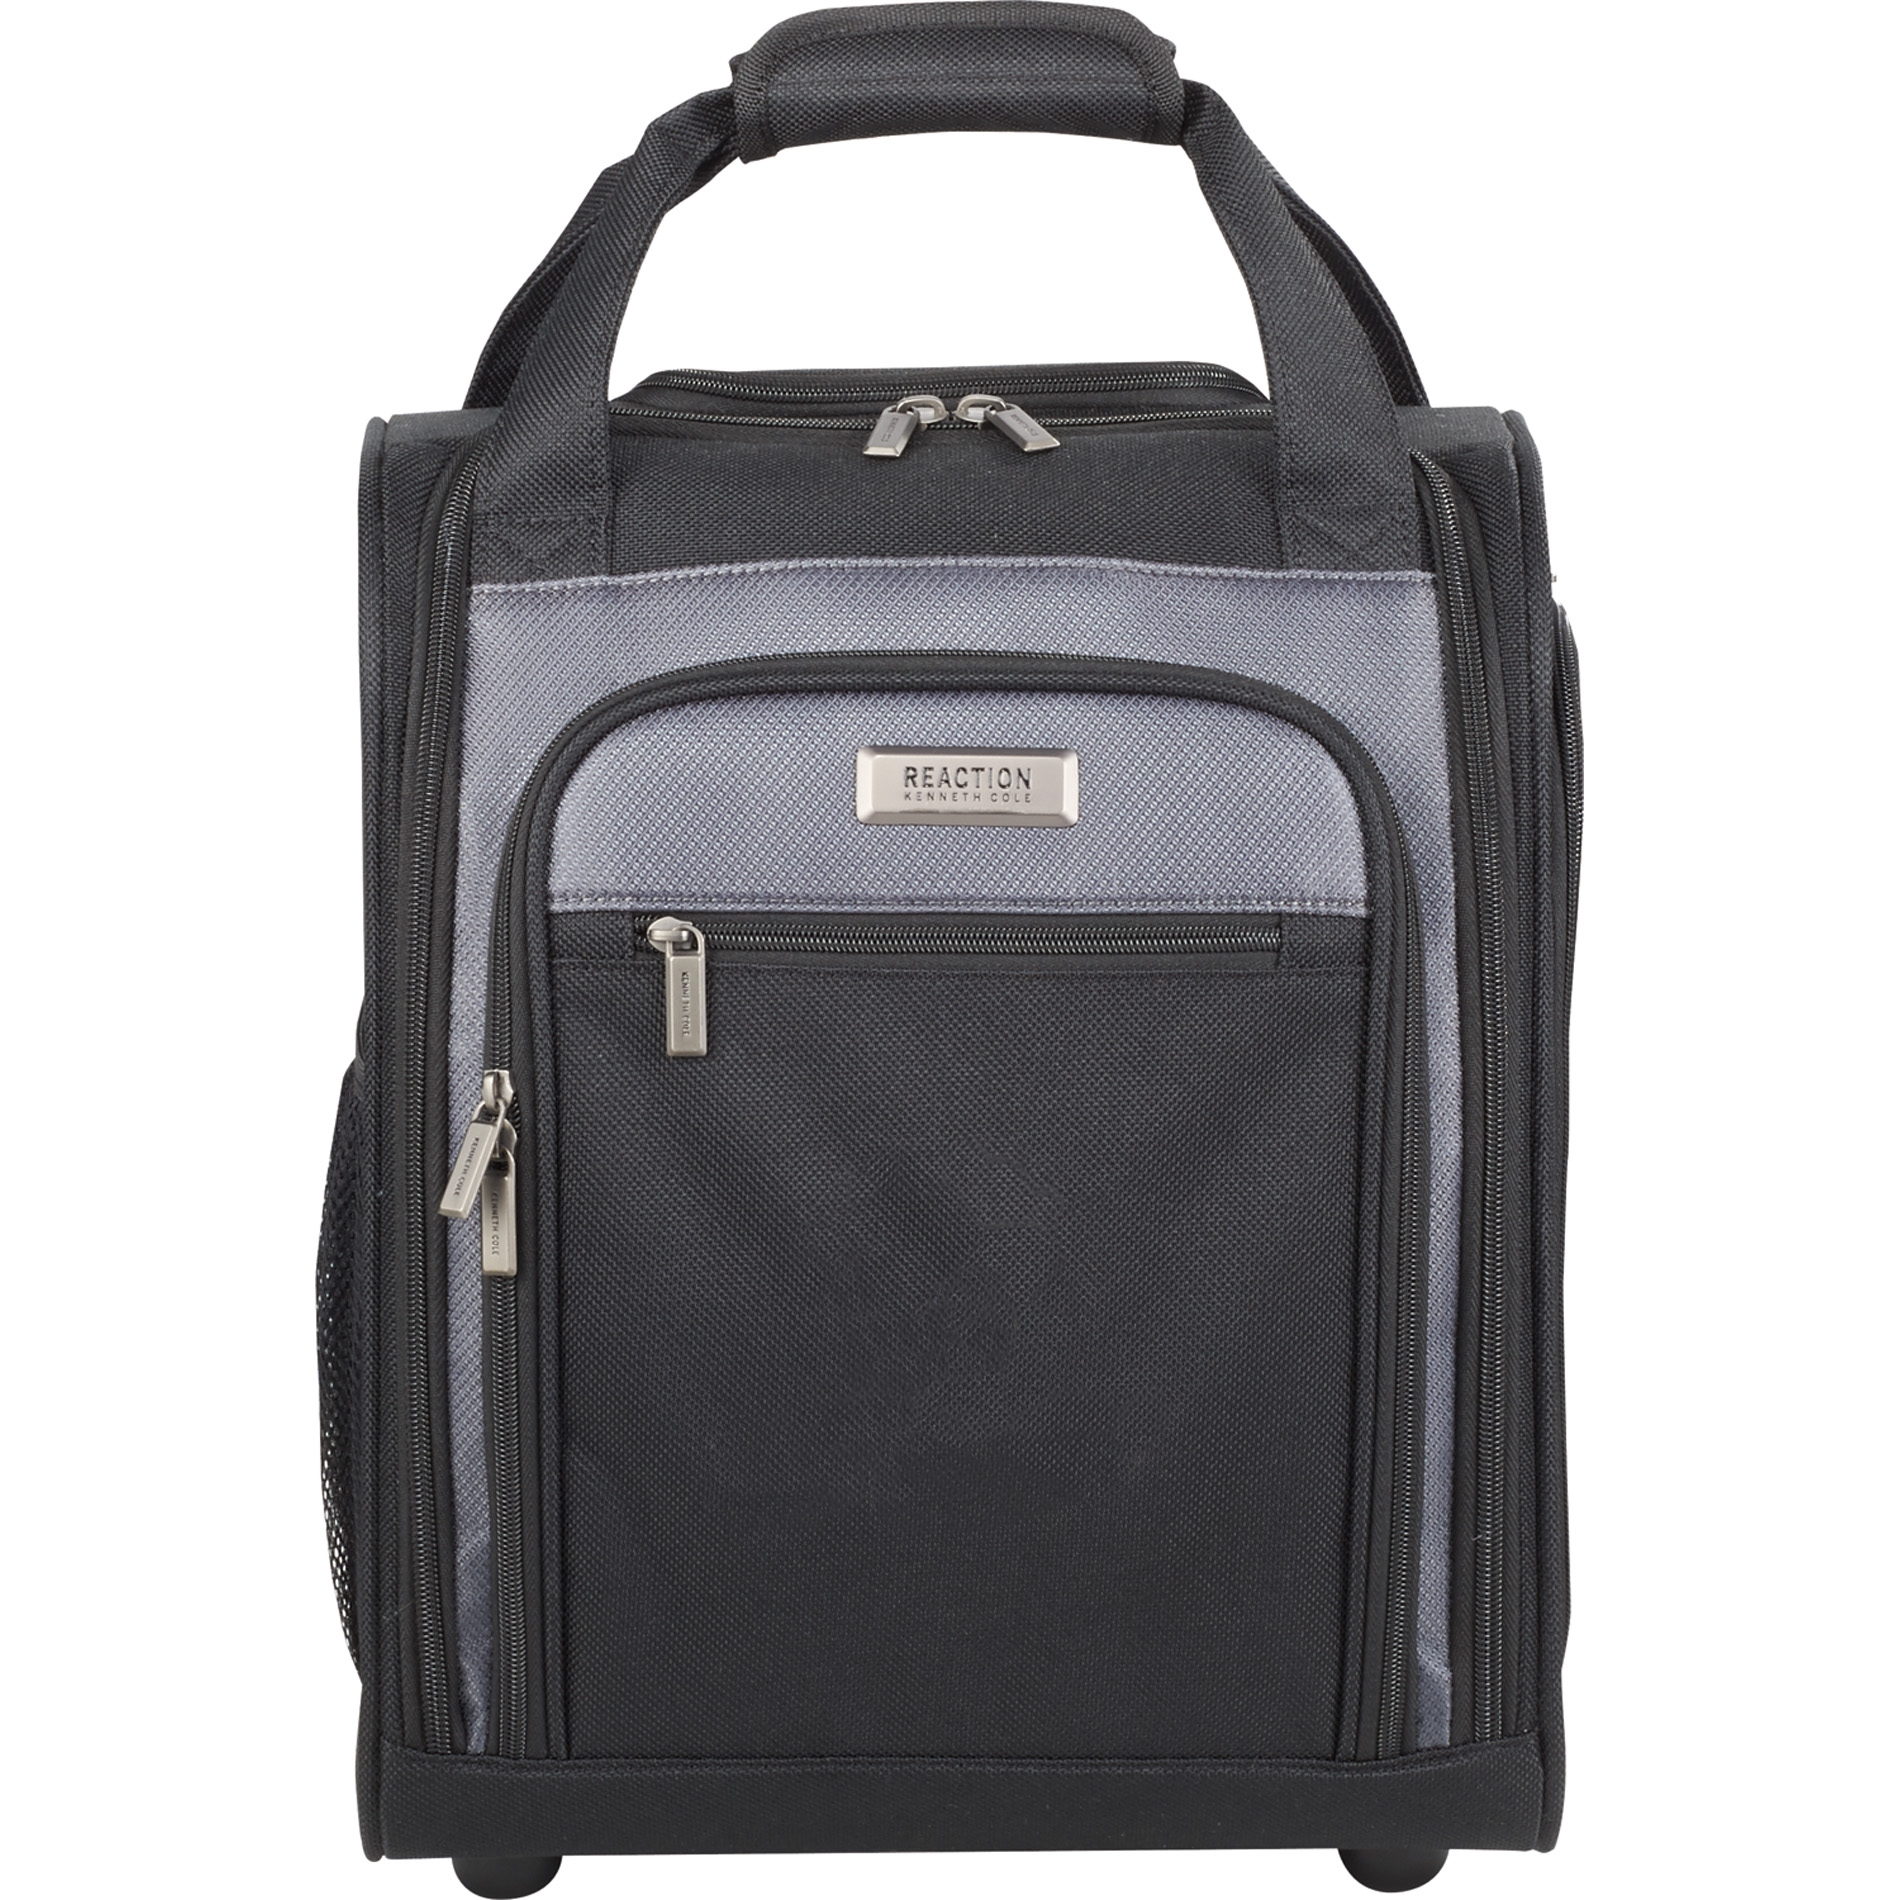 Kenneth Cole 9950-77 - Underseater Luggage